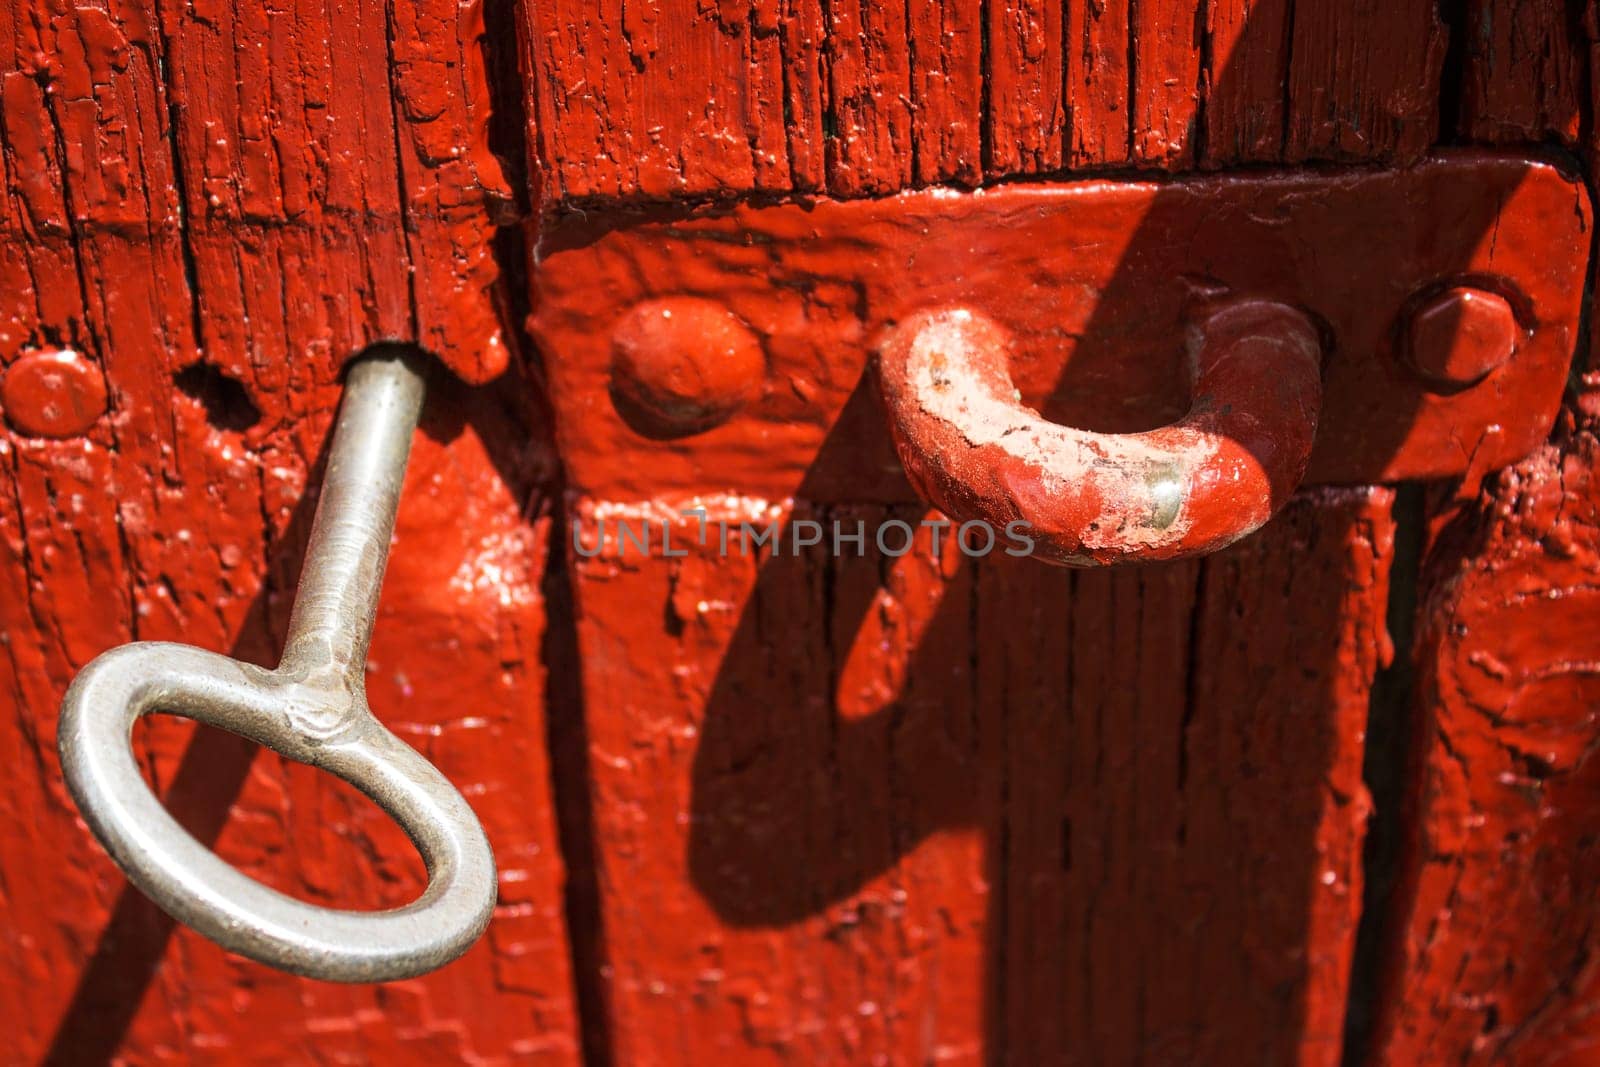 Antique iron key from the gate in the old red wooden gate.